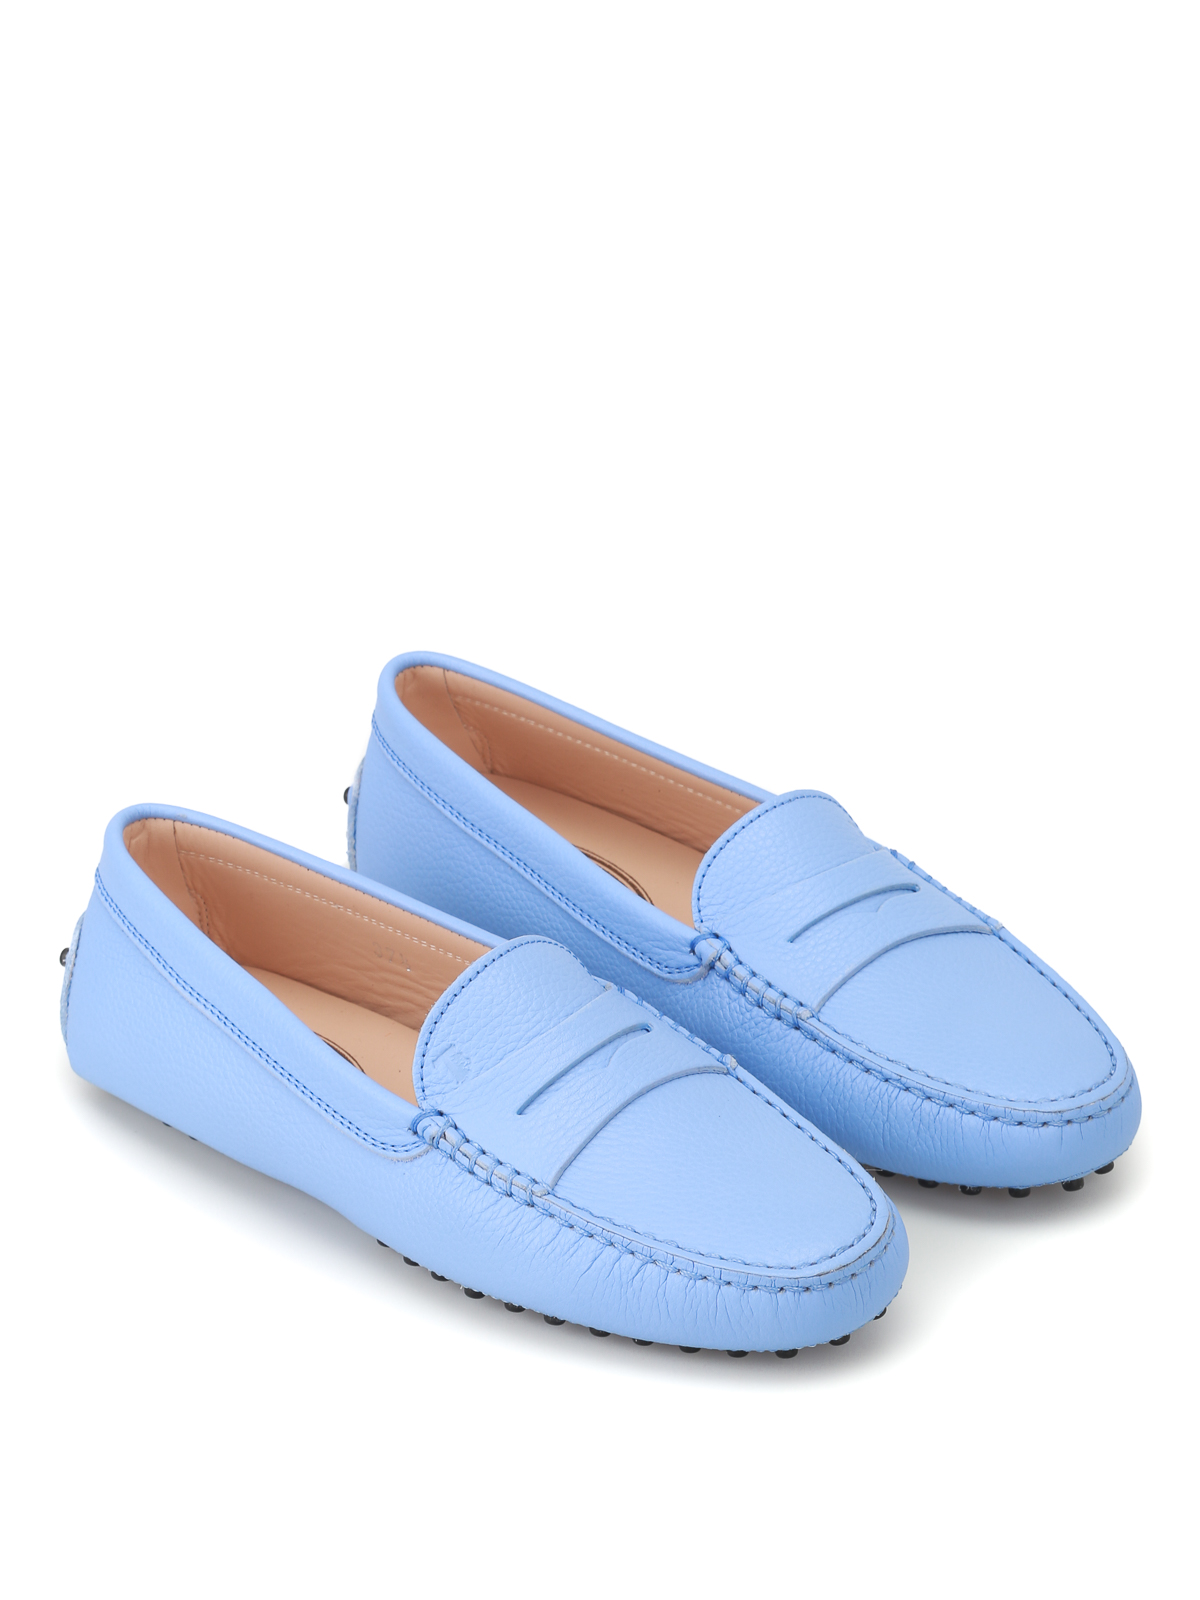 Gommino light blue leather loafers 